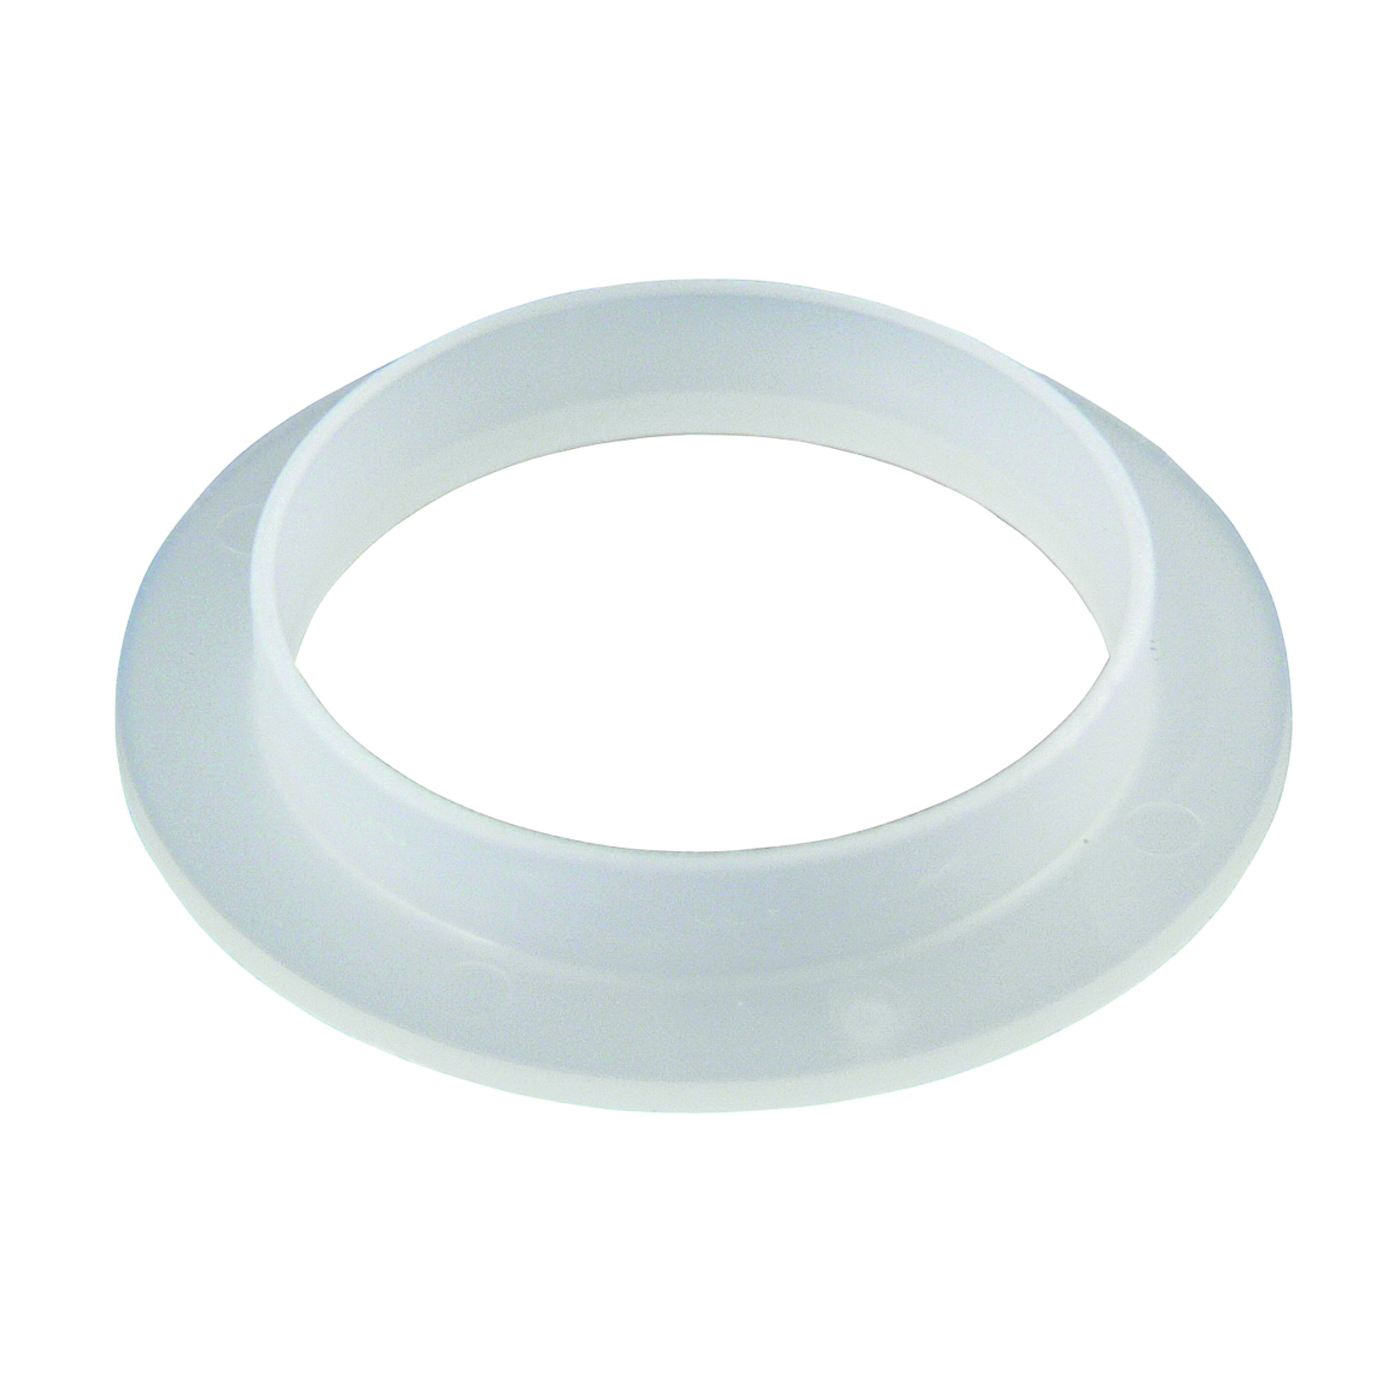 PP855-15 Tailpiece Washer, 1-1/2 in, Polyethylene, For: Plastic Drainage Systems